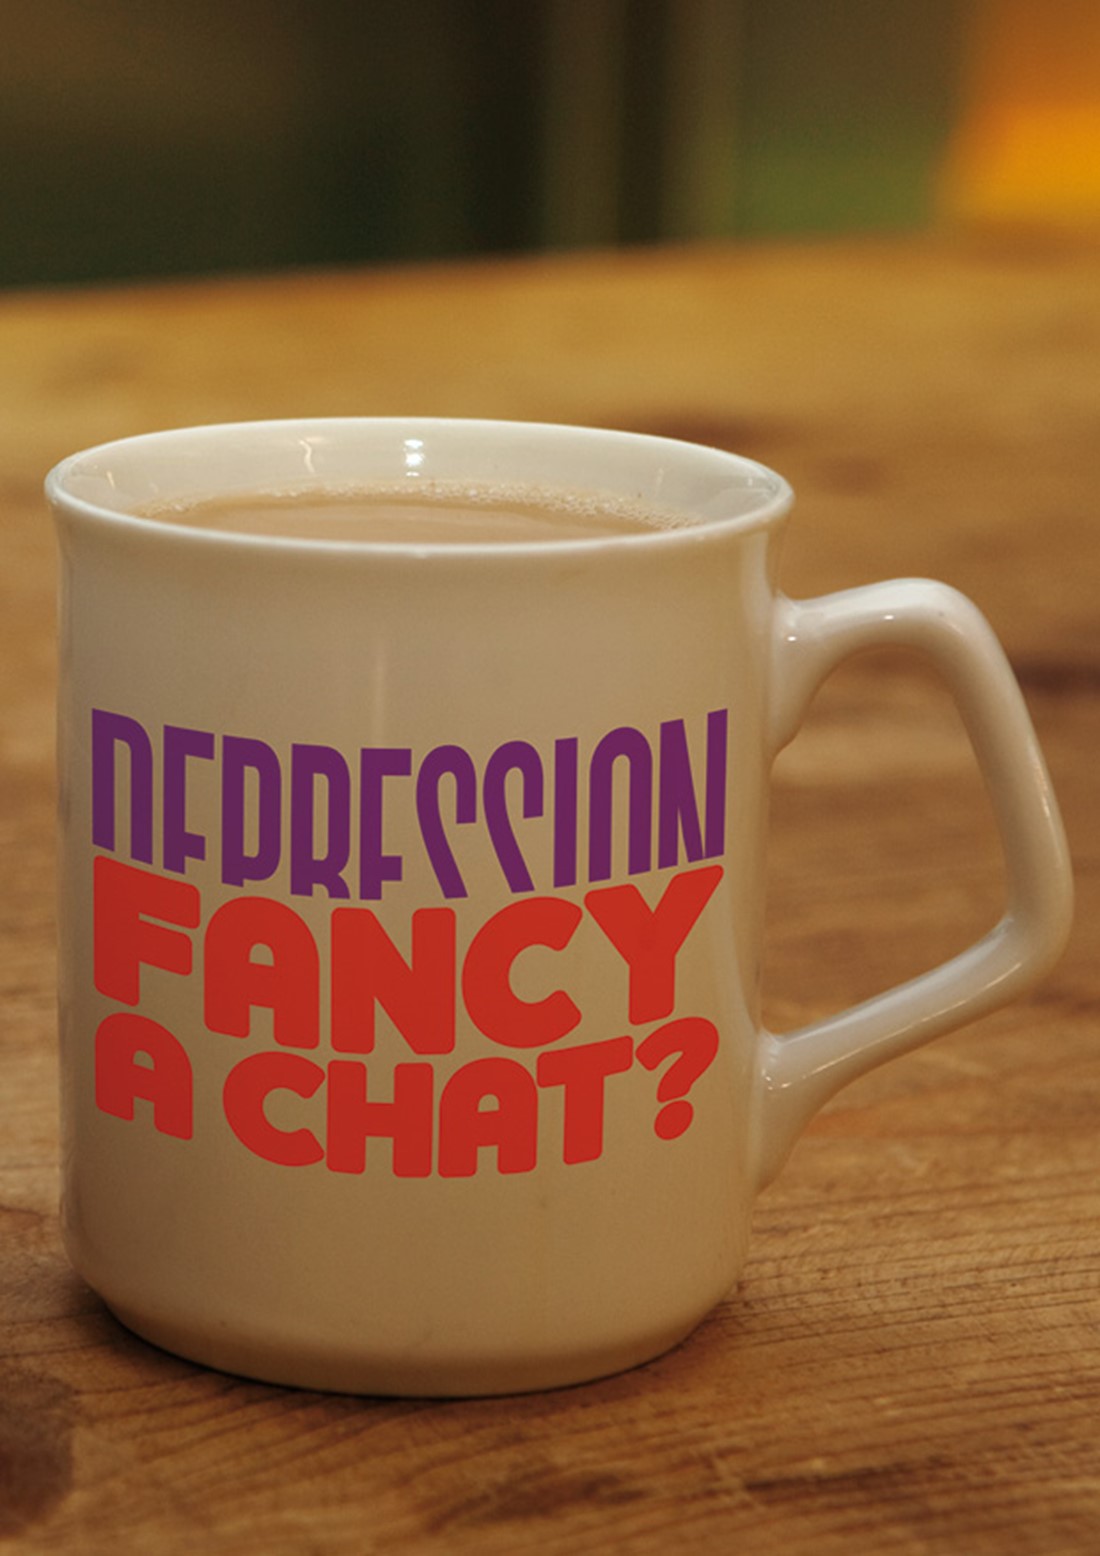 A mug of tea printed with the words 'Depression - Fancy a chat'